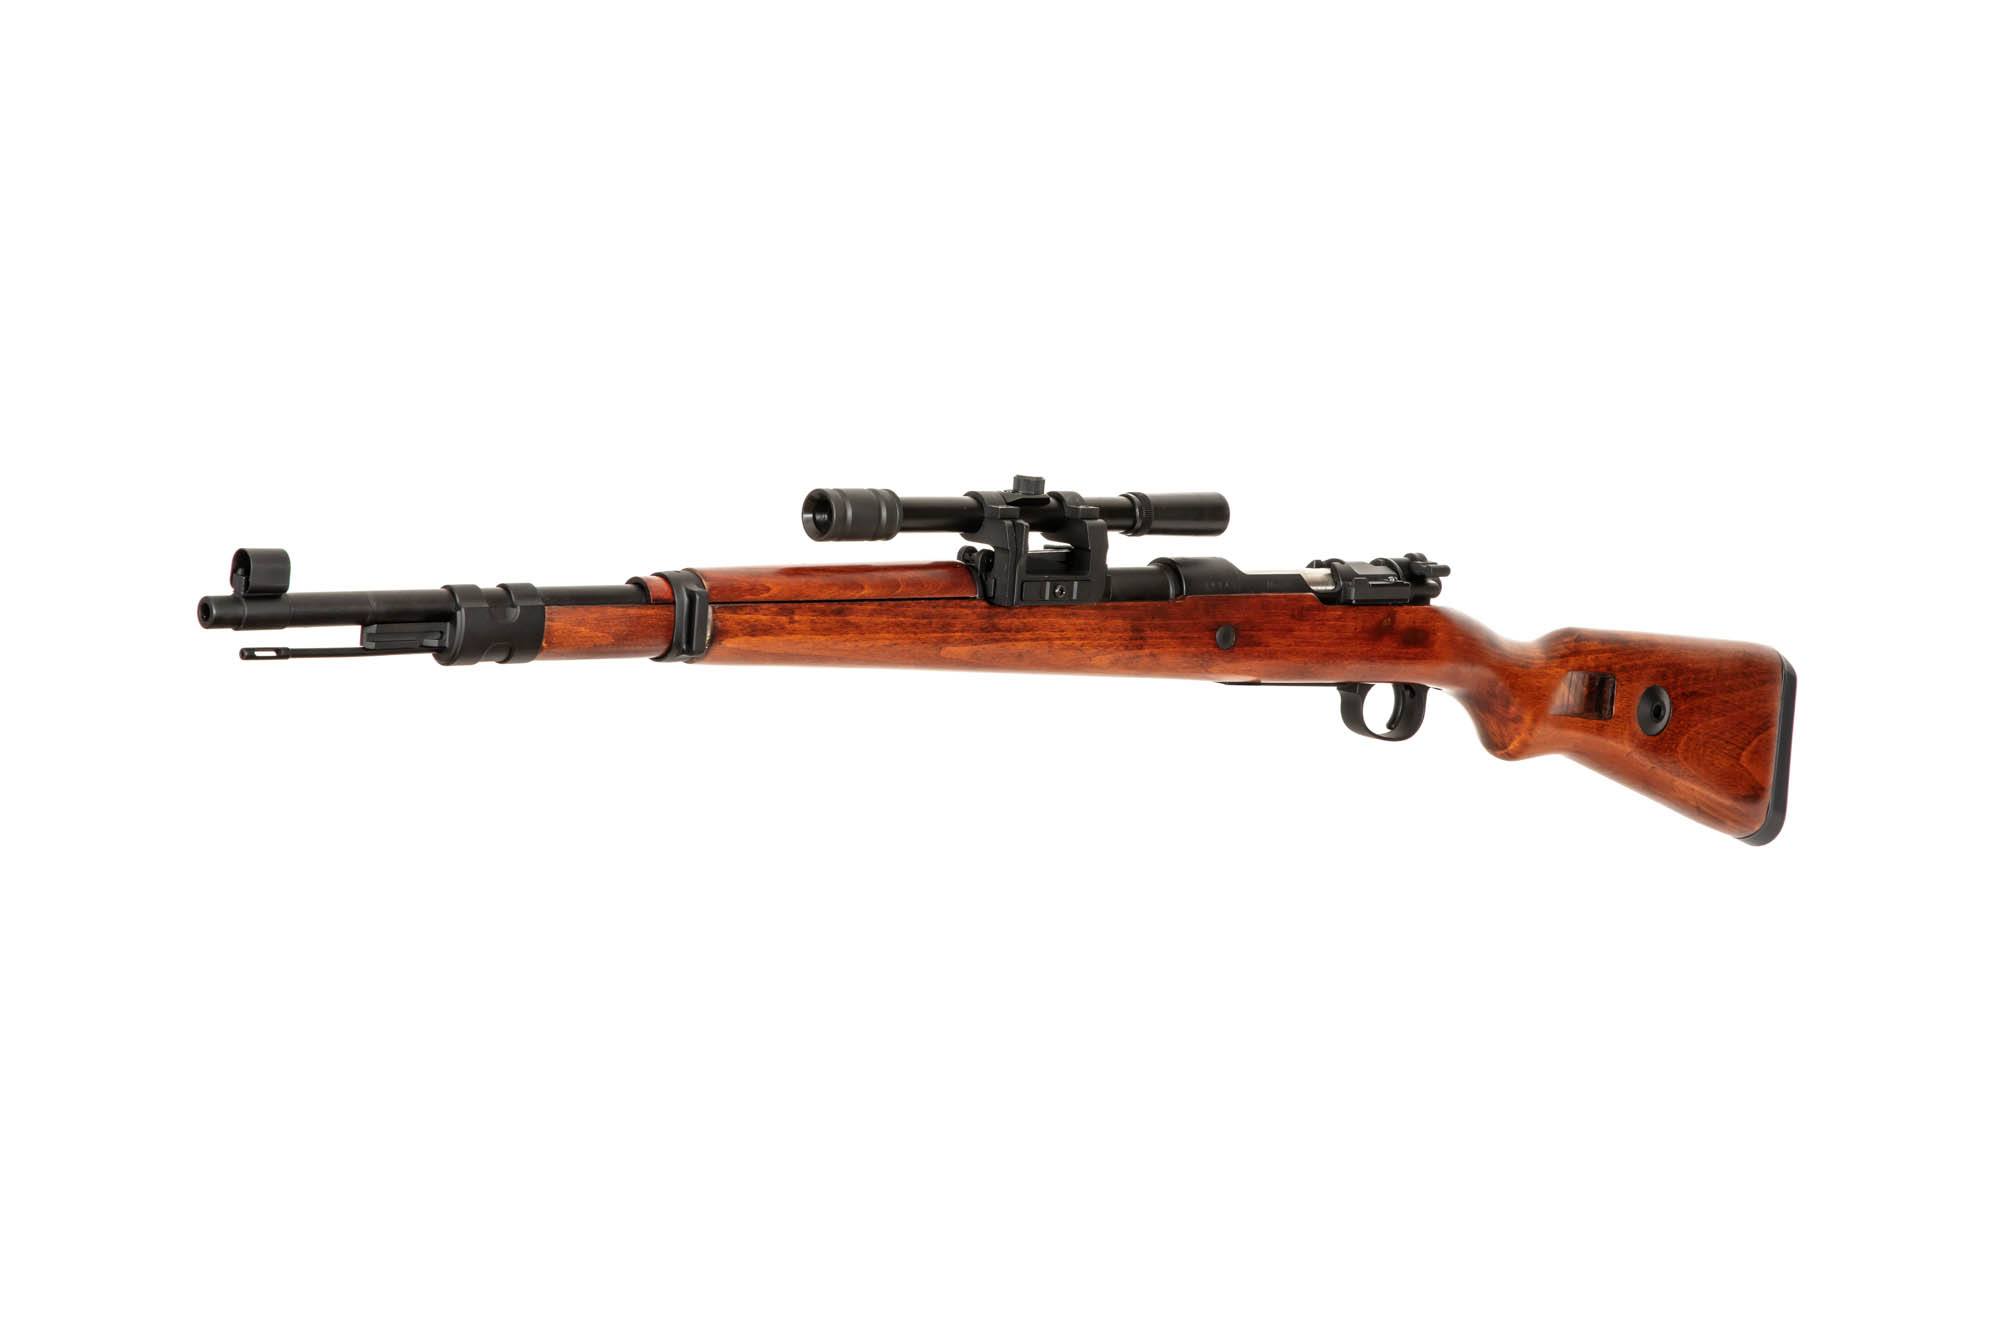 Kar98 Sniper Rifle with scope (wood stock)